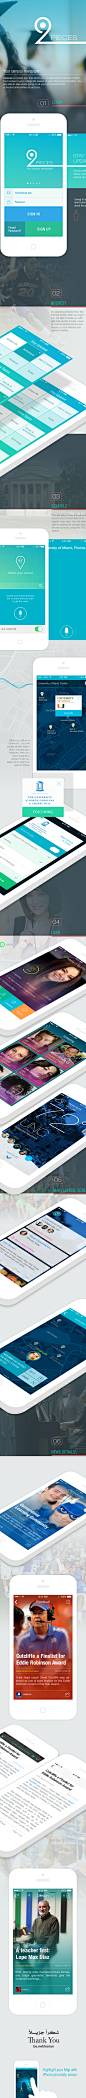 Social Student App IPHONE/ANDROID on Behance